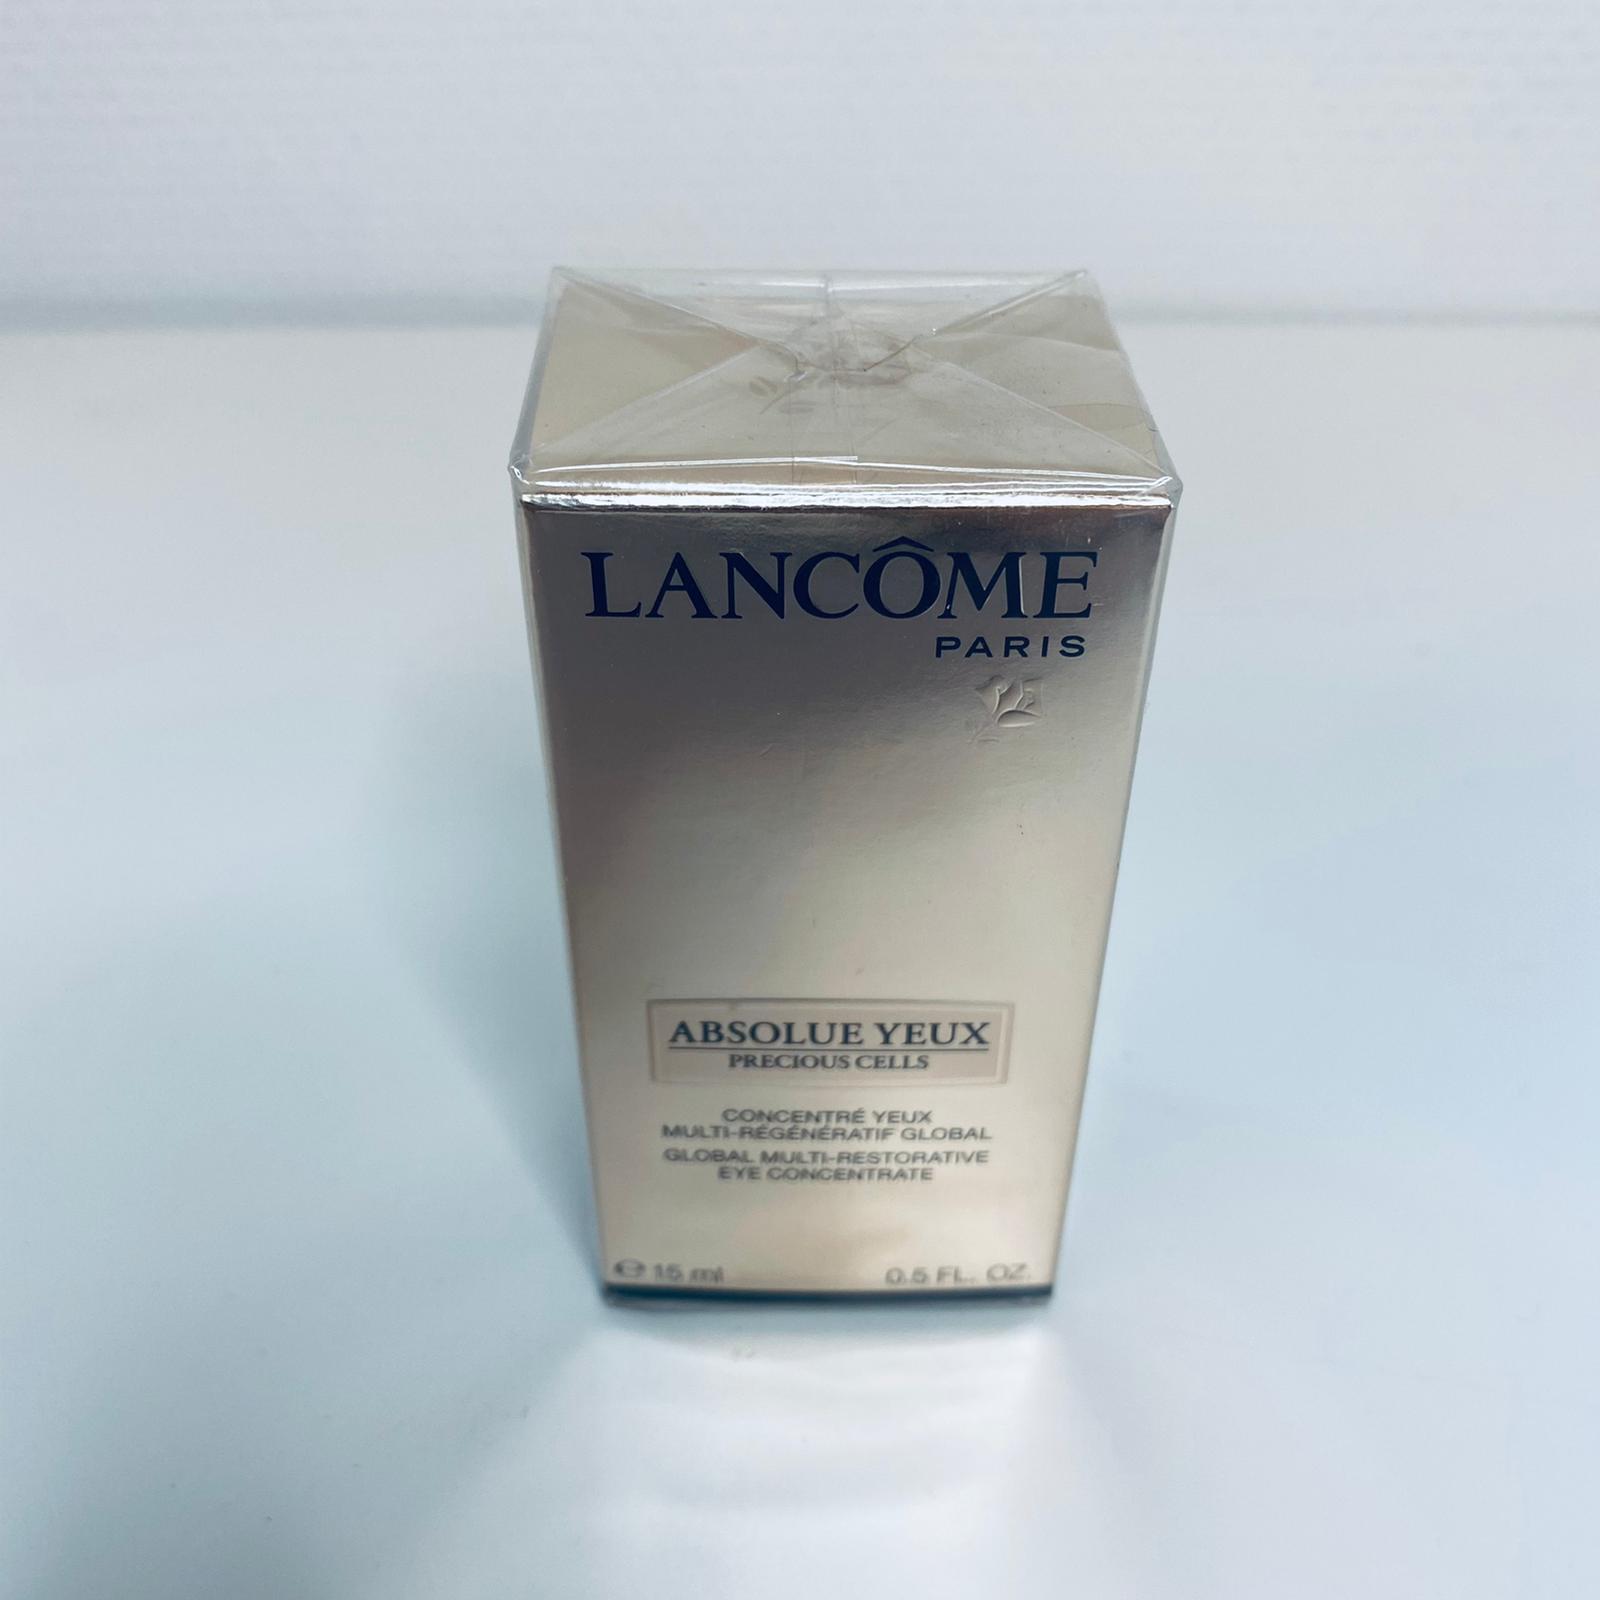 Lancome Absolue Yeux eye concentrate 15 ml